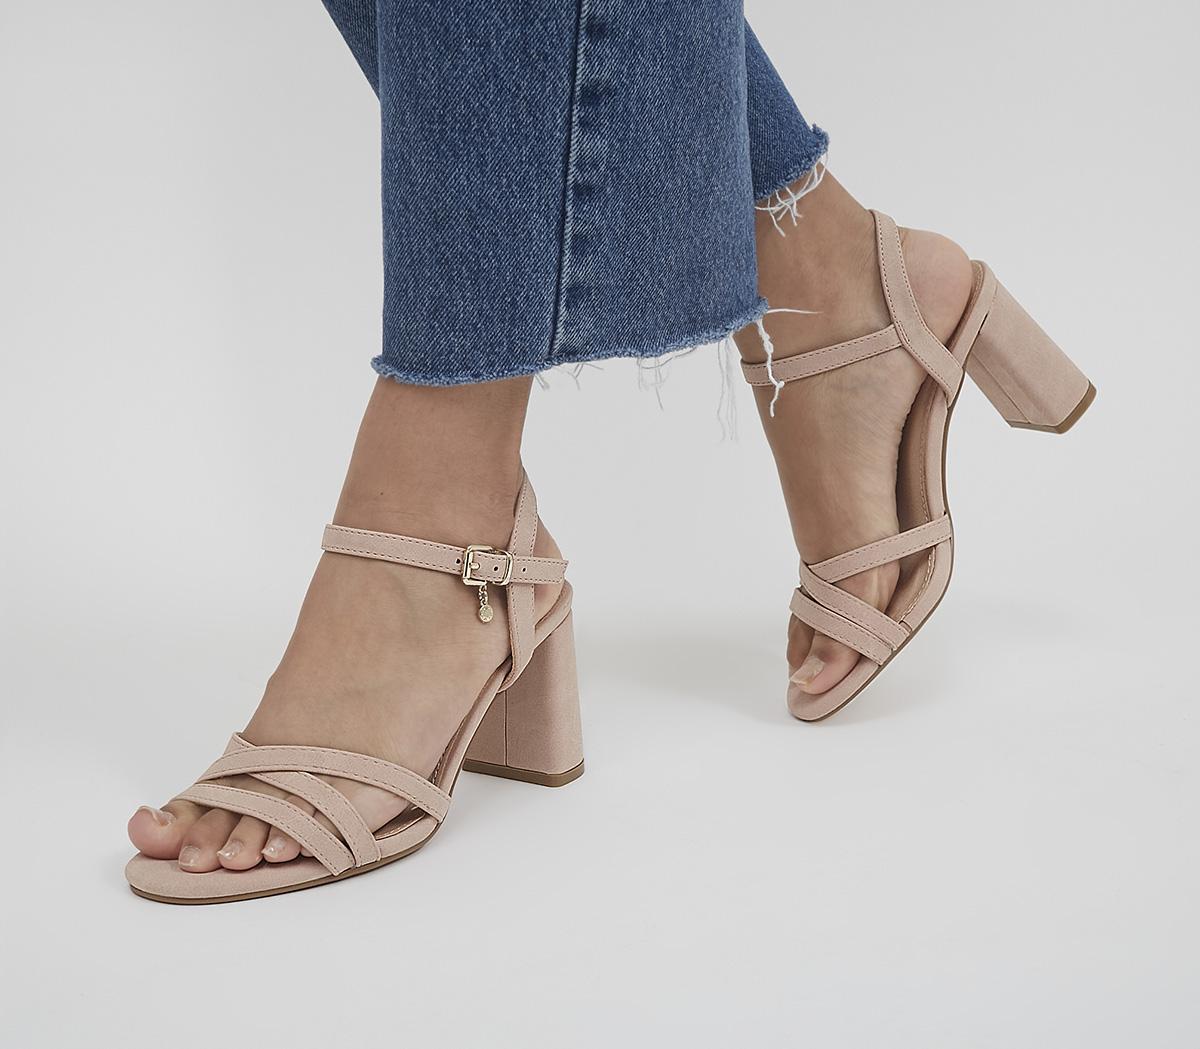 OFFICEMoonstone Two Part Strappy Block Heeled SandalsBeige